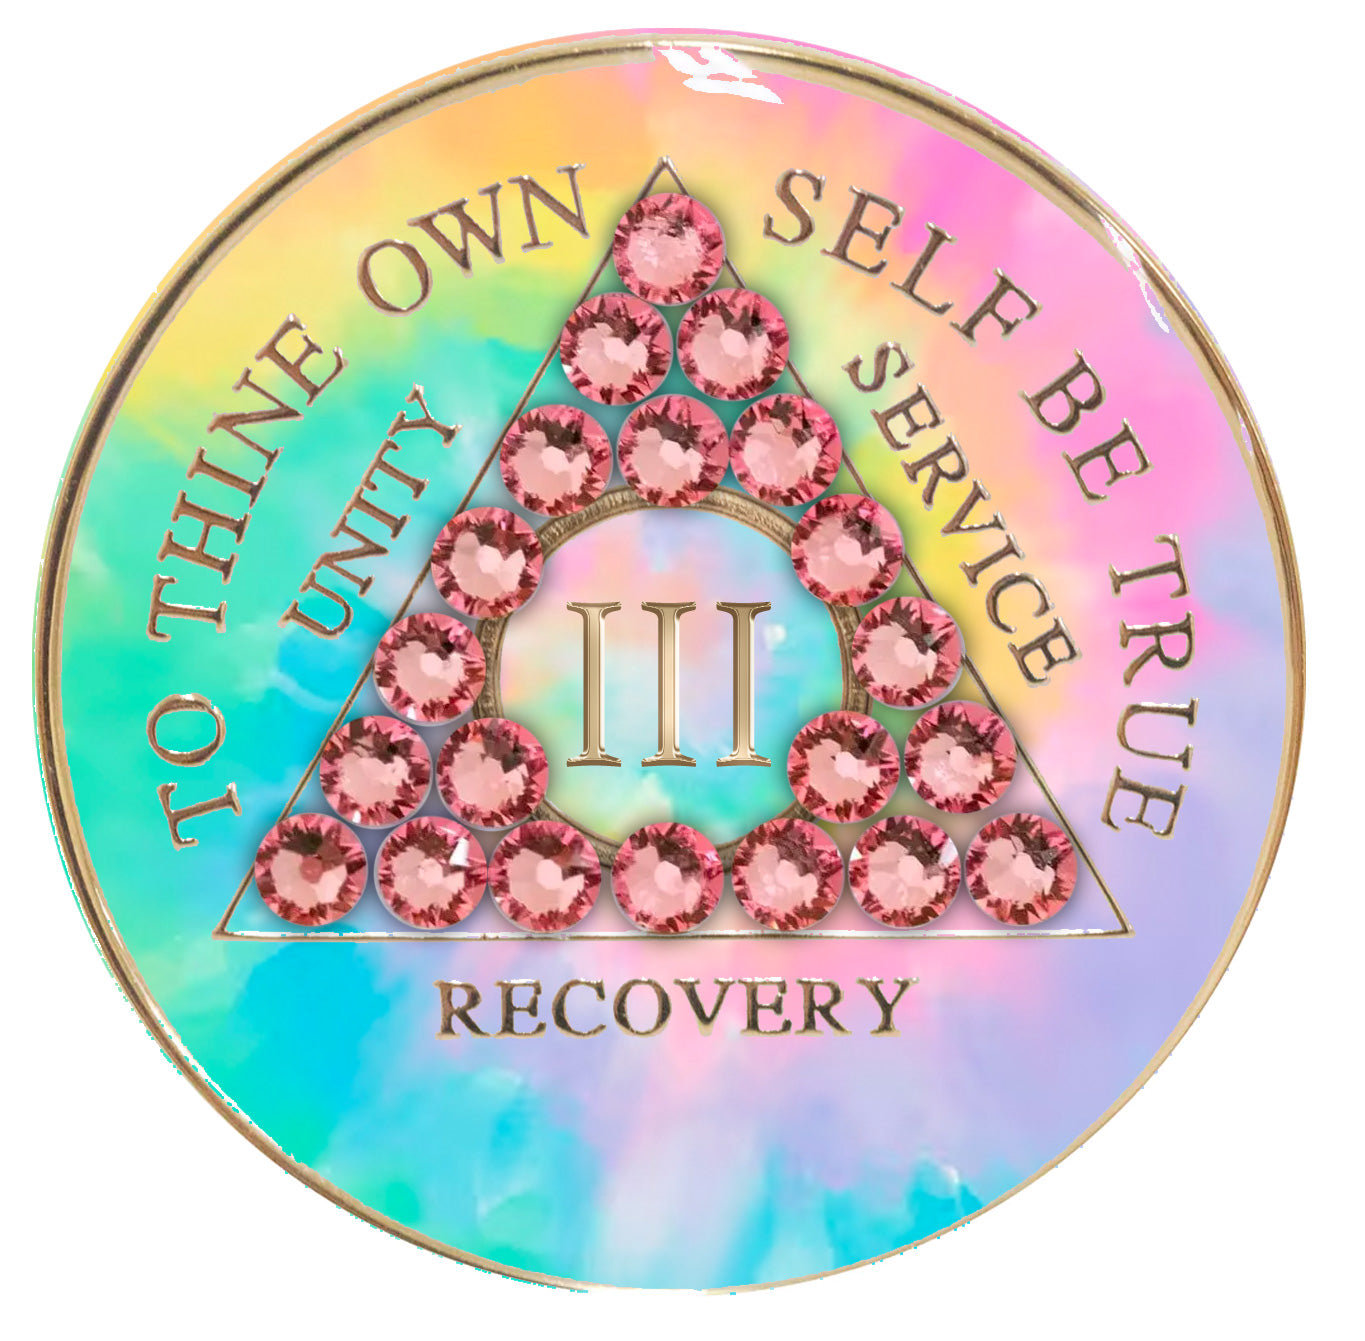 3 year AA medallion pastel tie-dye representing a psychic change that is needed in the recovery journey, with twenty-one light rose genuine crystals, pink, blue, yellow, and green, in the shape of the triangle, with the AA moto and roman numeral embossed in 14k gold-plated brass, the medallion is sealed with resin for a glossy, scratch free finish.